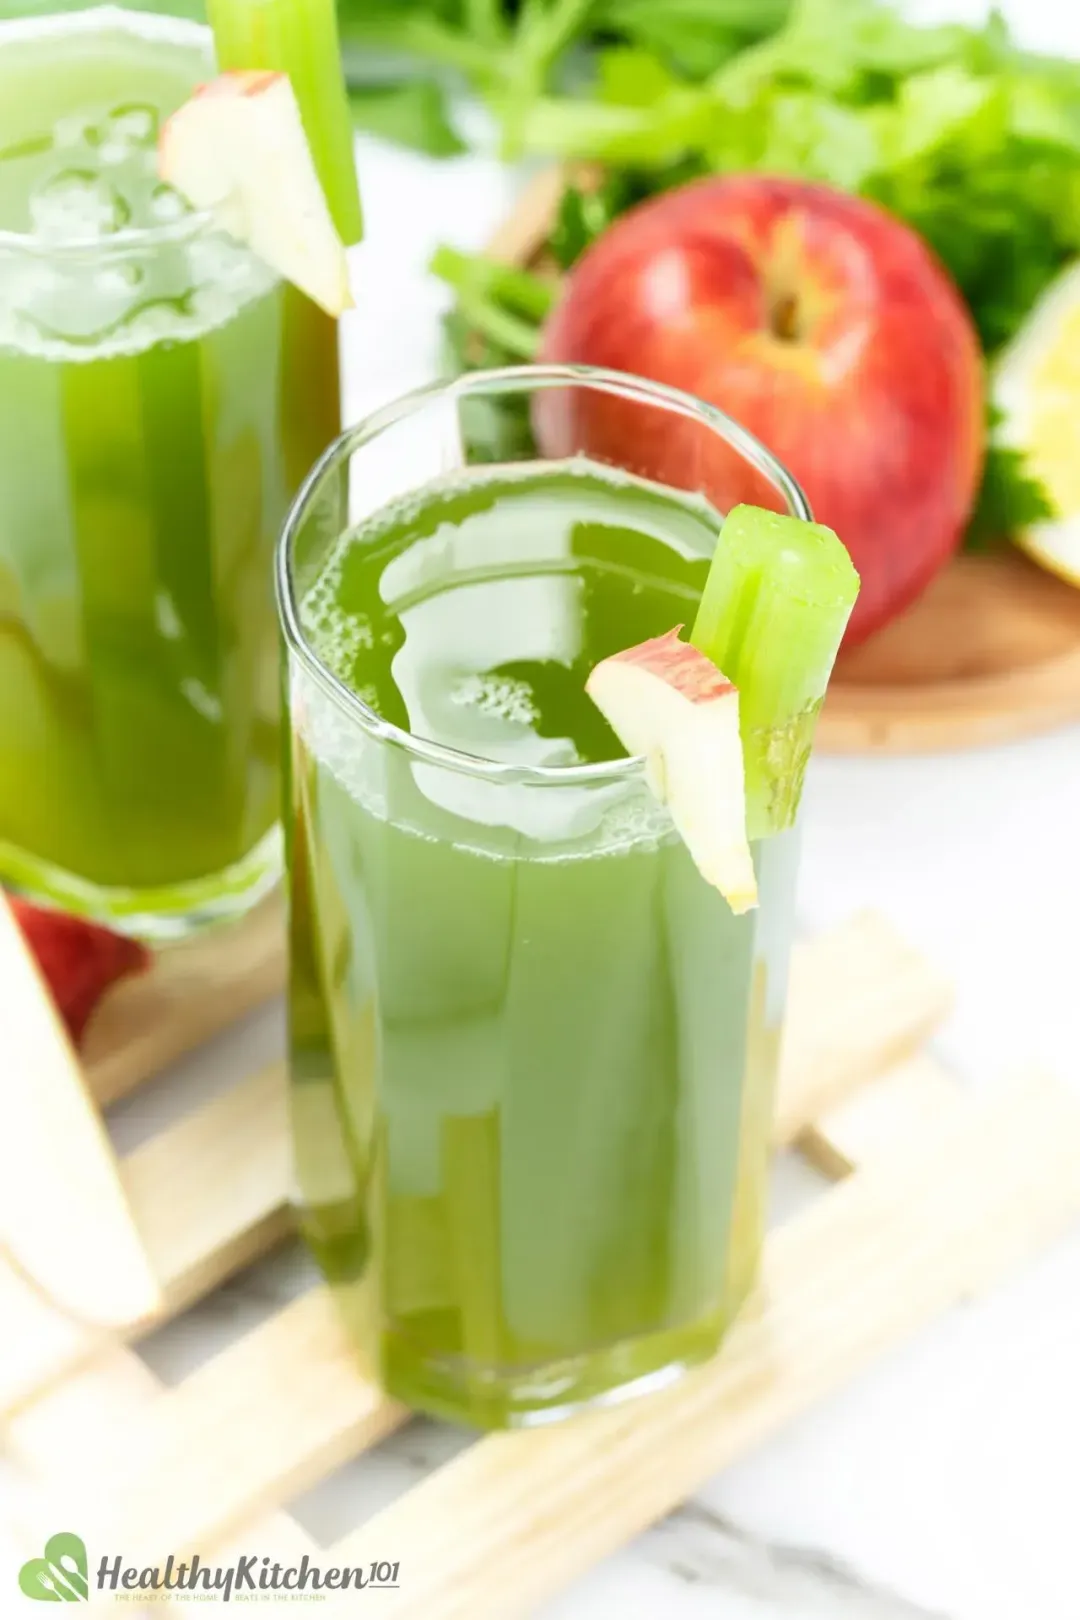 Two glasses of celery juice in tall glasses with apple slice and celery stalk as garnish, in front of a red apple